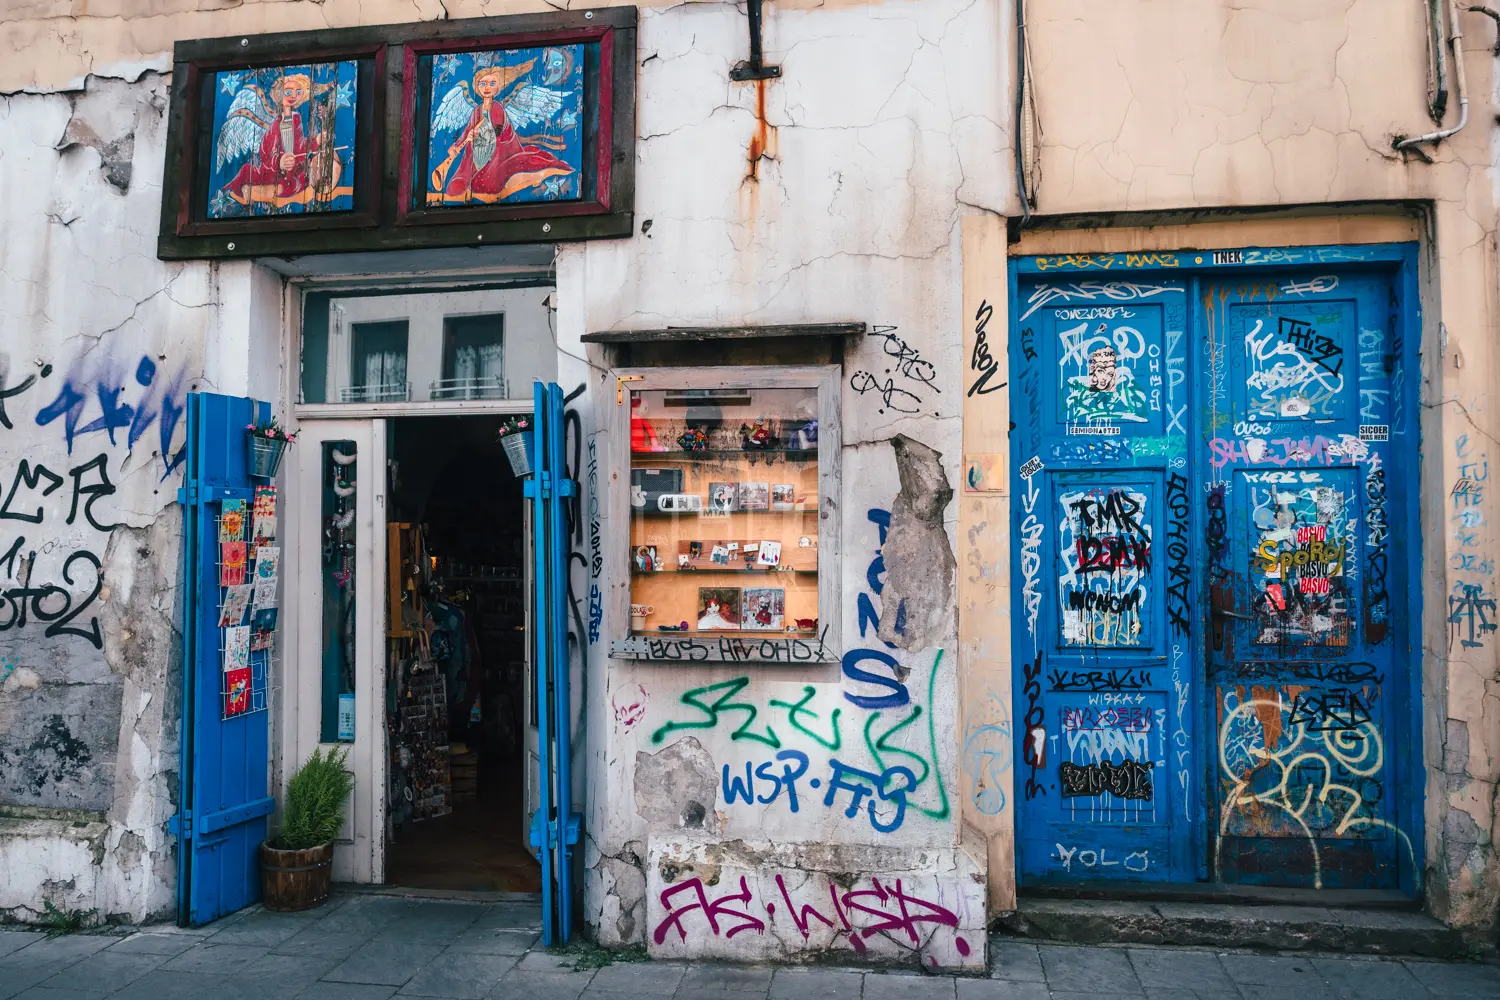 Entrance to a boutique in Kazimierz covered in graffiti, with a closed graffiti covered blue door on the right.